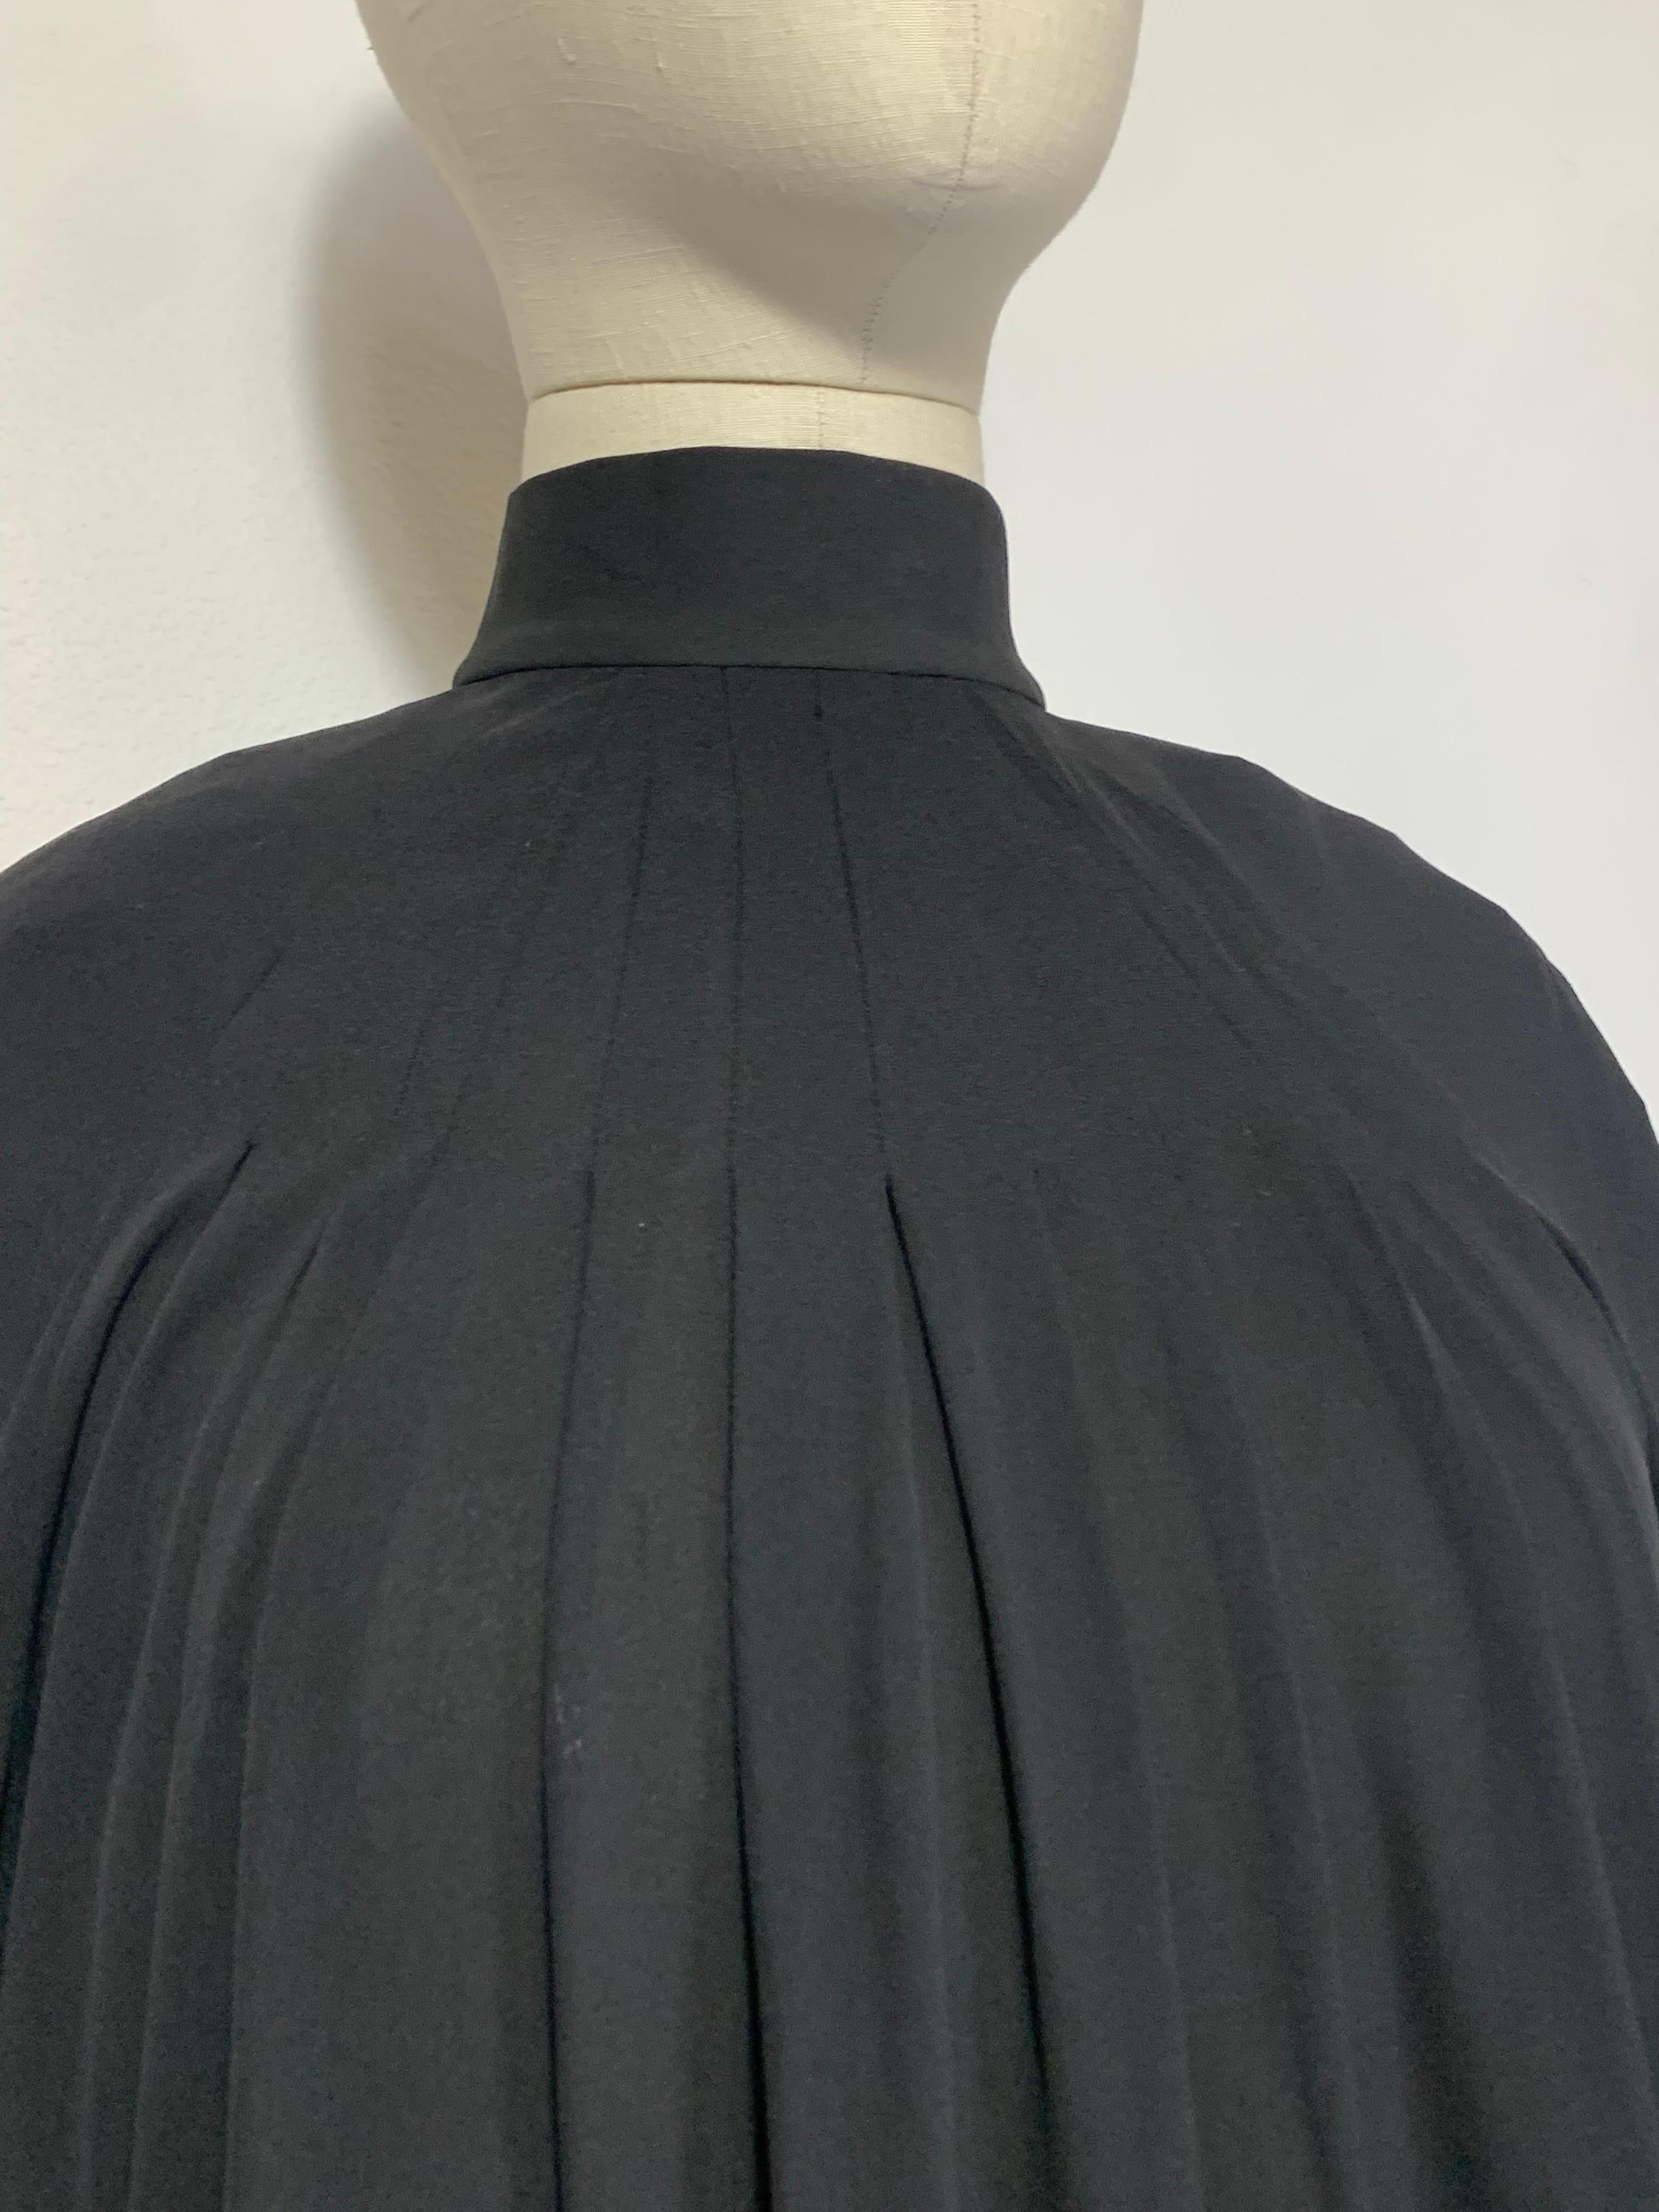 Andrew Gn Black Silk Crepe Monastic-Styled Maxi Dress w Full Pleats & High Neck  For Sale 1